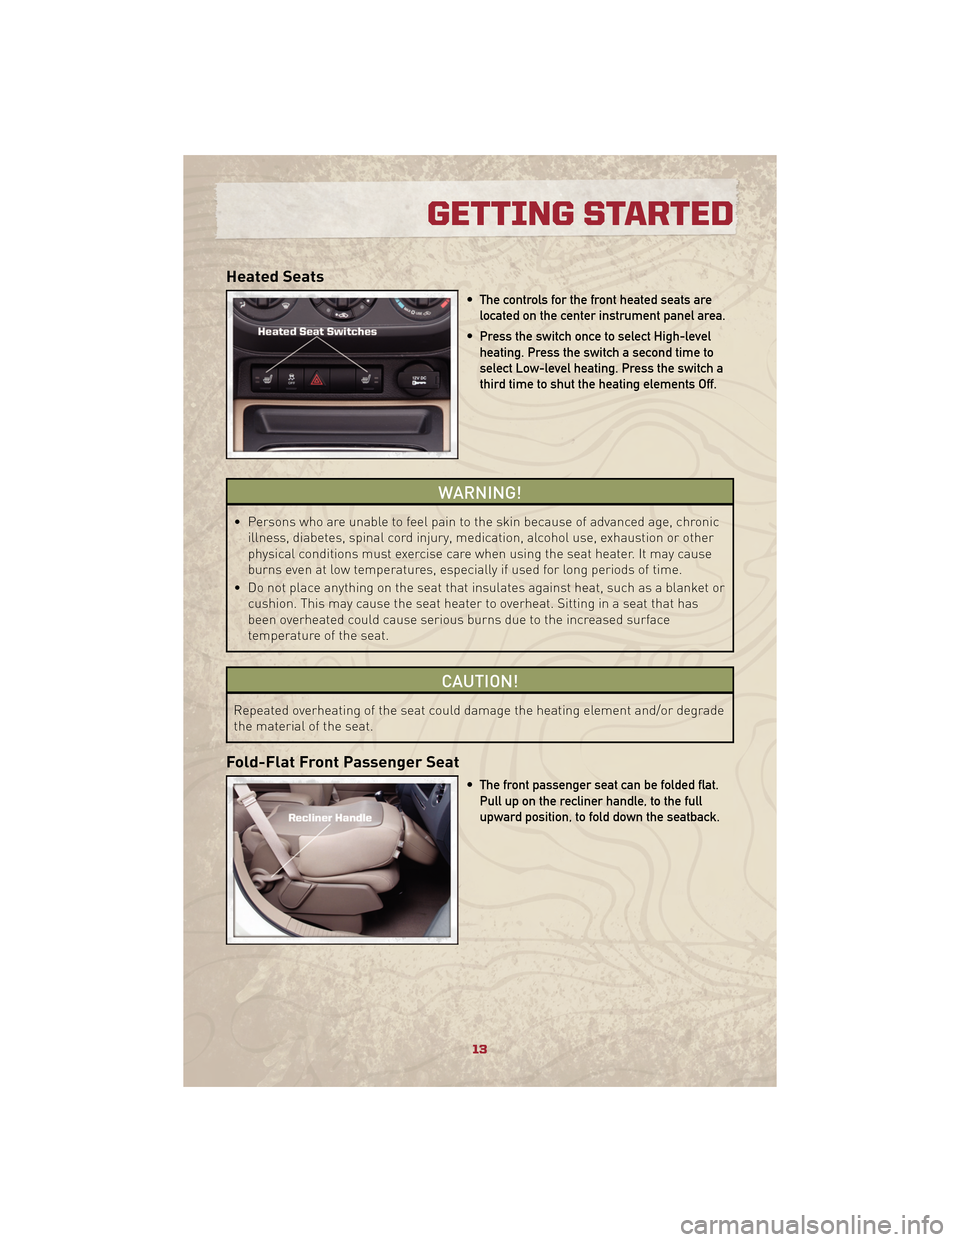 JEEP PATRIOT 2010 1.G User Guide Heated Seats
• The controls for the front heated seats arelocated on the center instrument panel area.
• Press the switch once to select High-level heating. Press the switch a second time to
selec